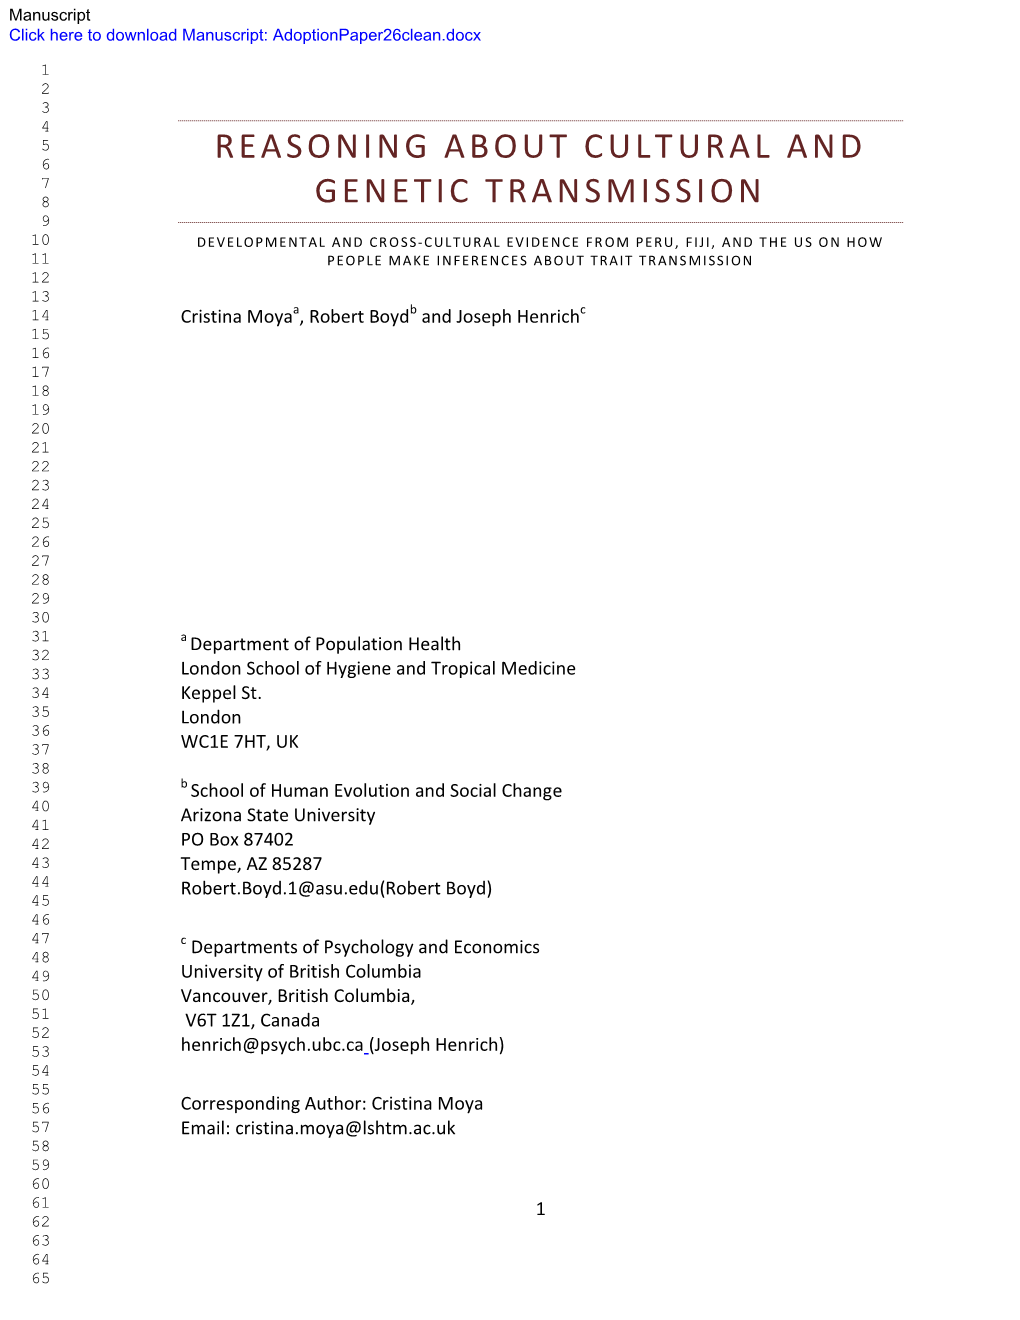 Reasoning About Cultural and Genetic Transmission